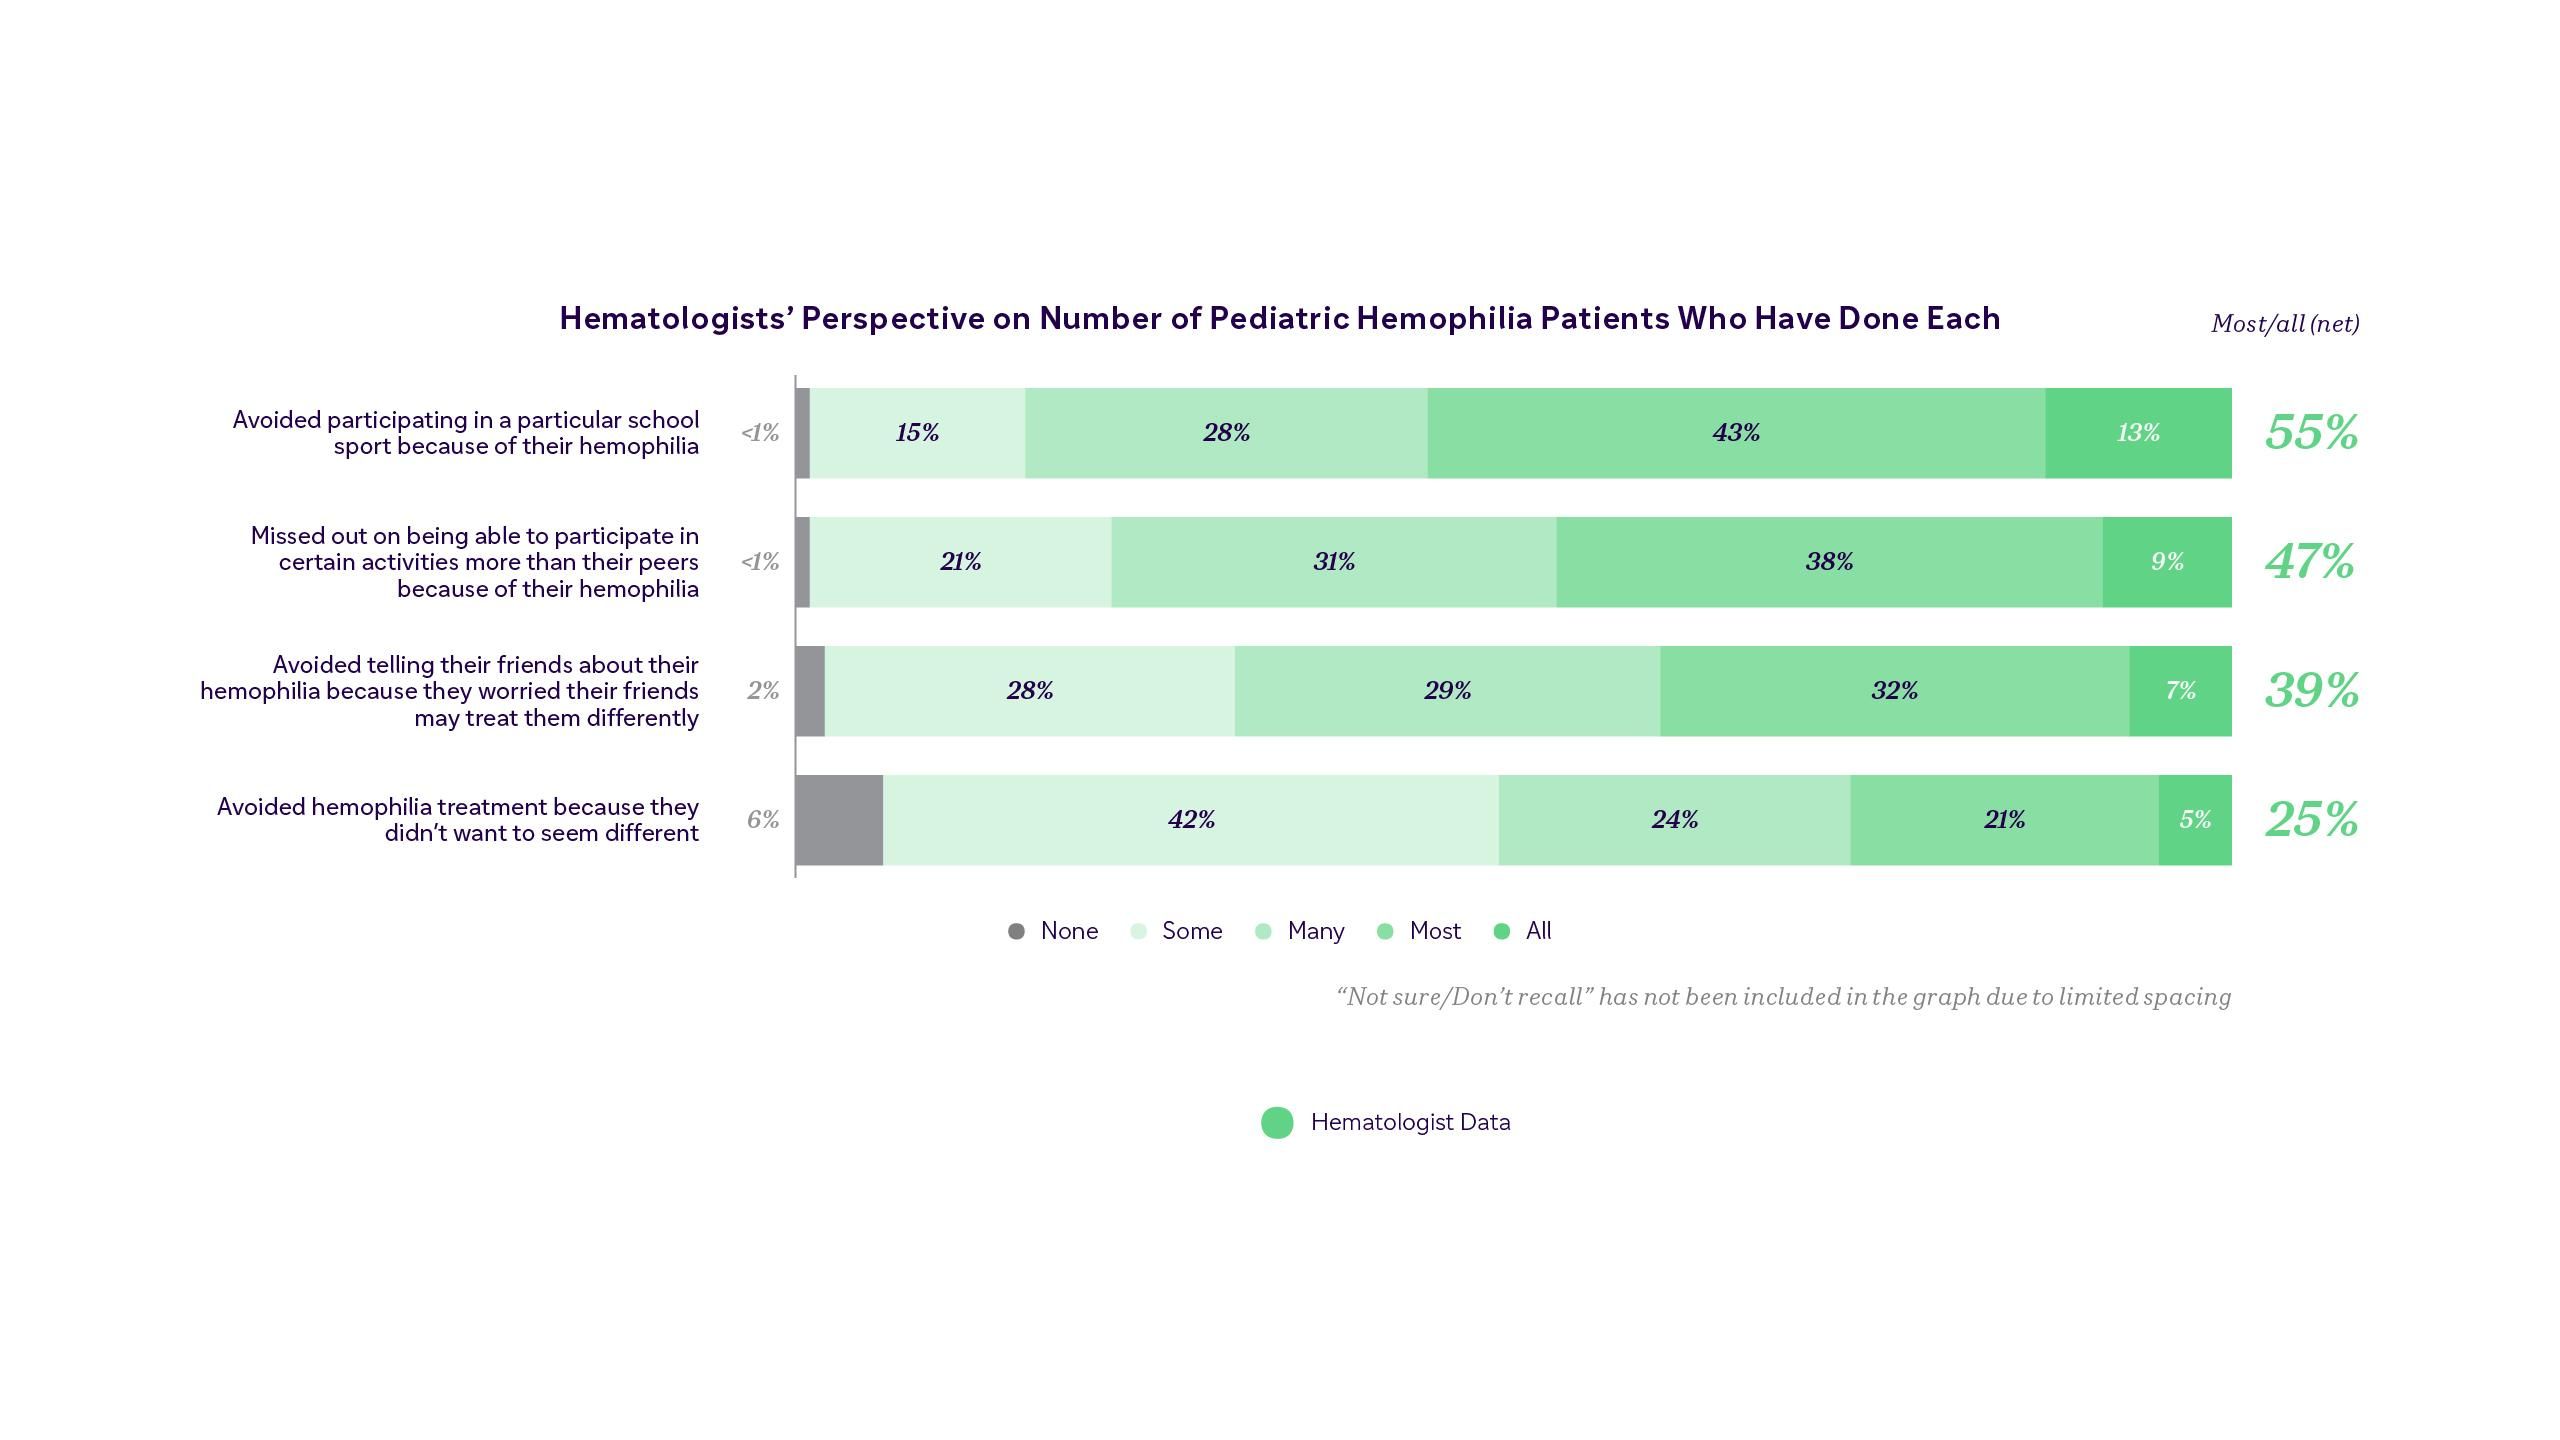 Sanofi’s global hemophilia survey looked at hematologists’ perspective on the number of pediatric patients who altered their actions based on having hemophilia.